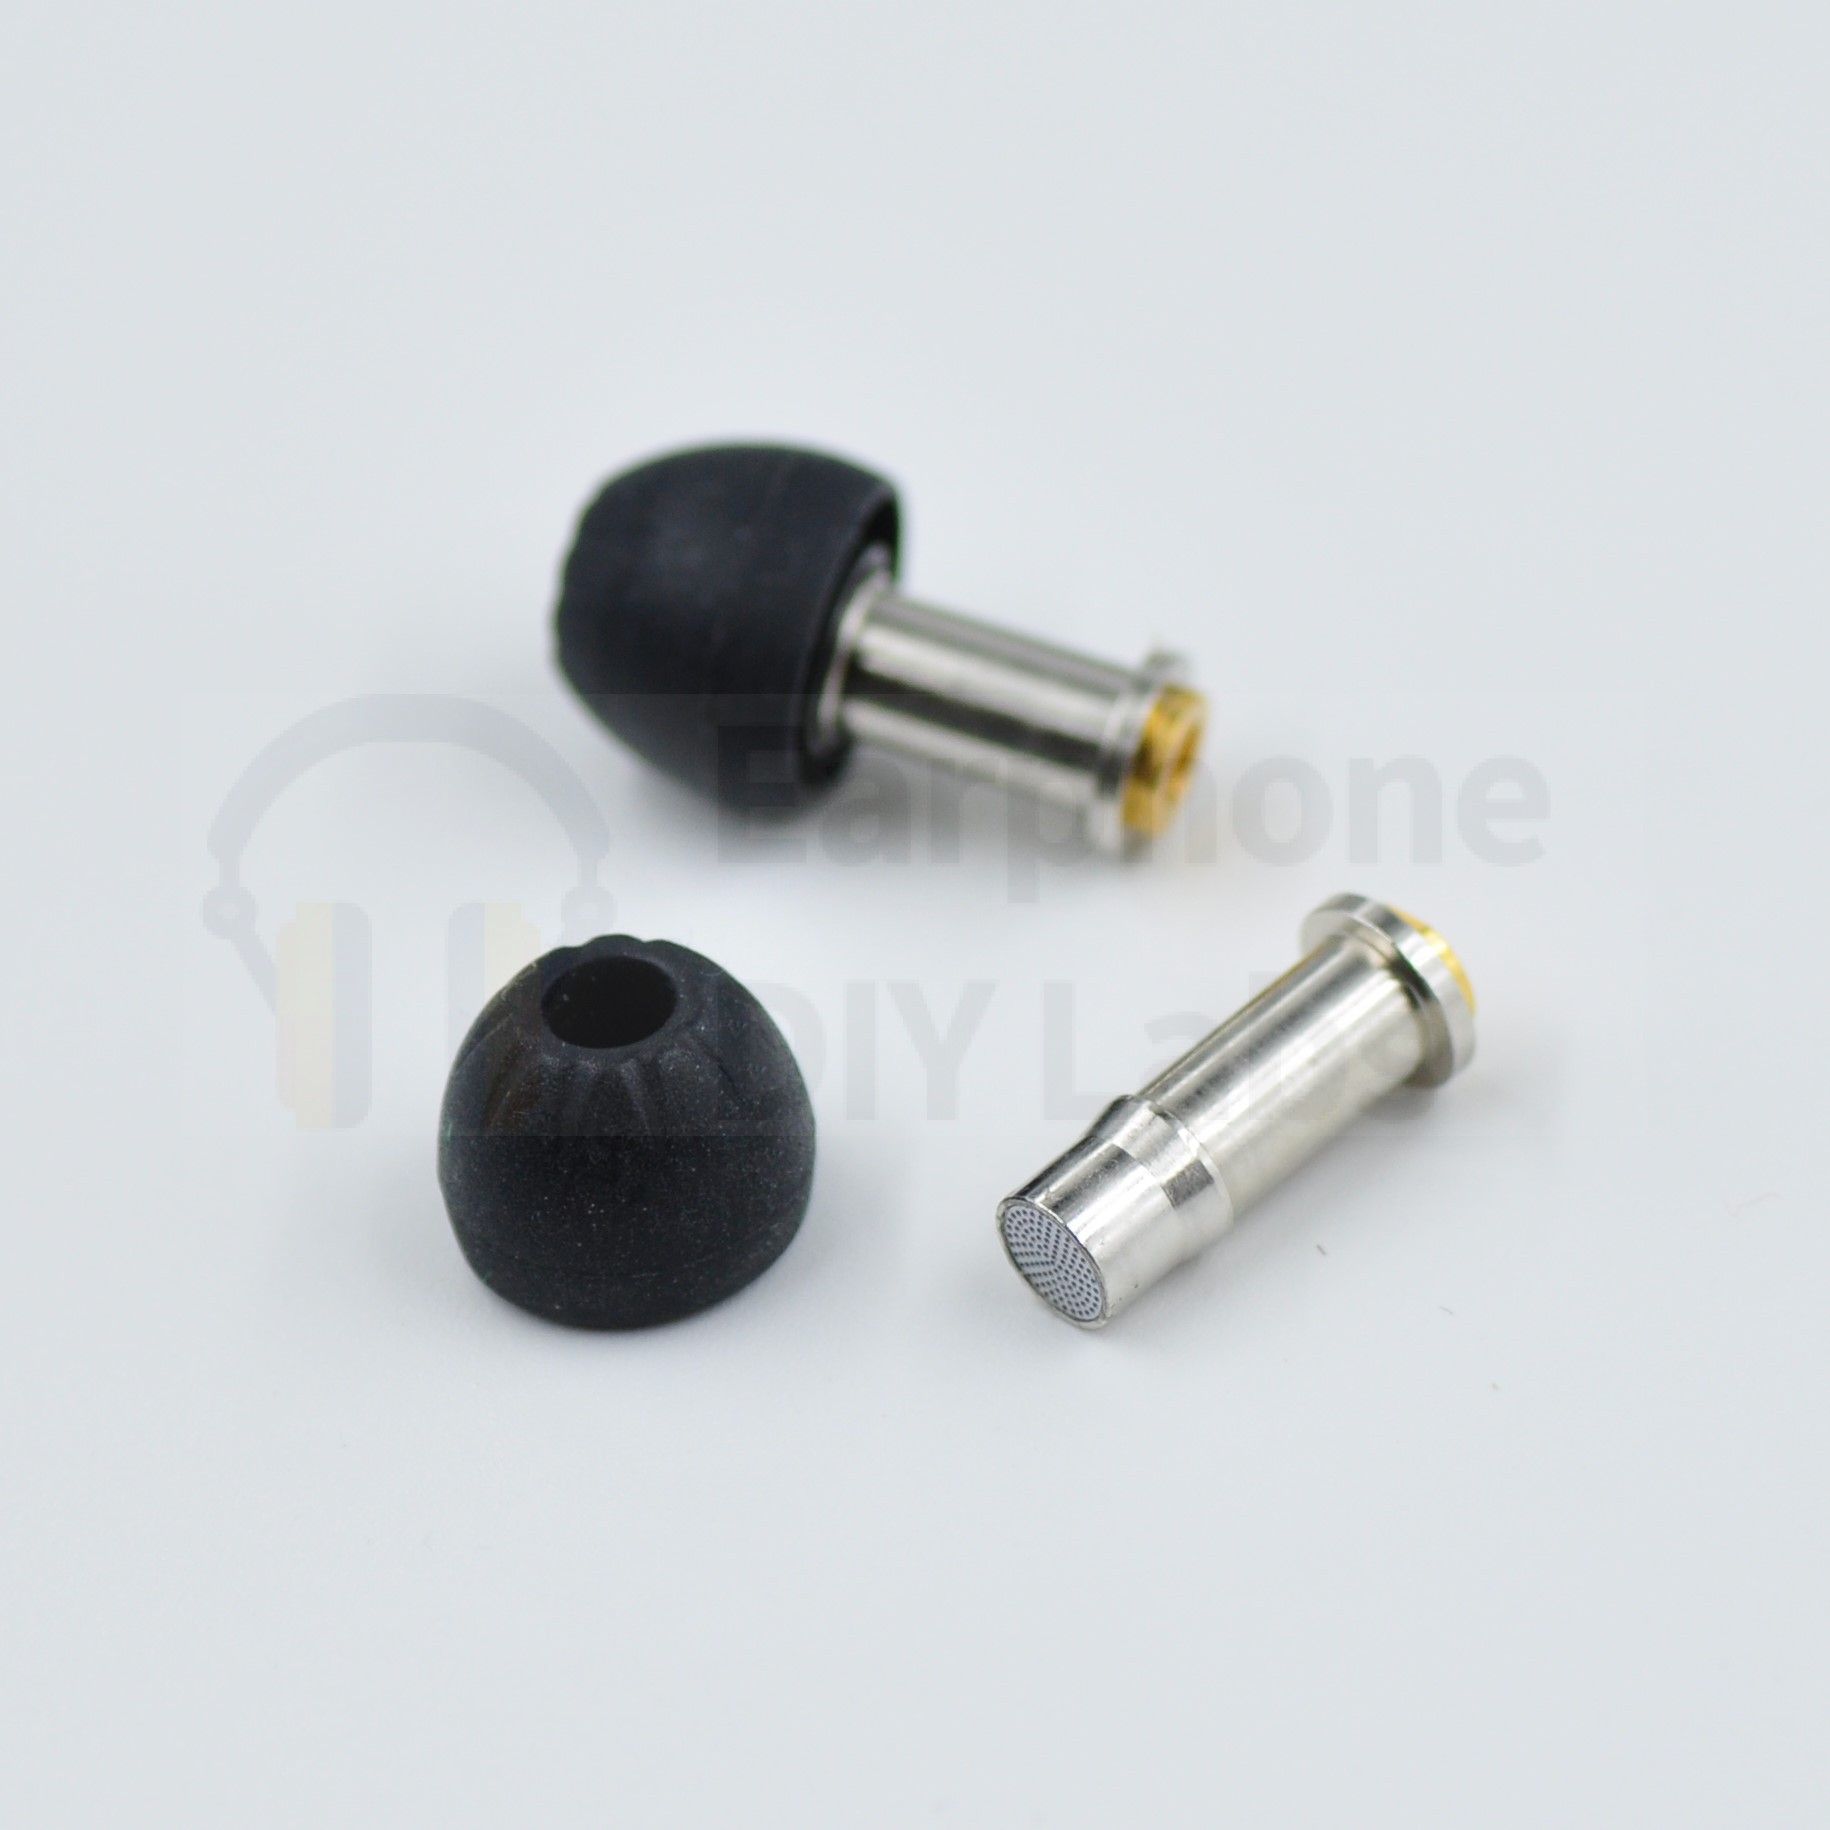 EDL F7200 High Resolution Earphone with Sonion or Knowles BA